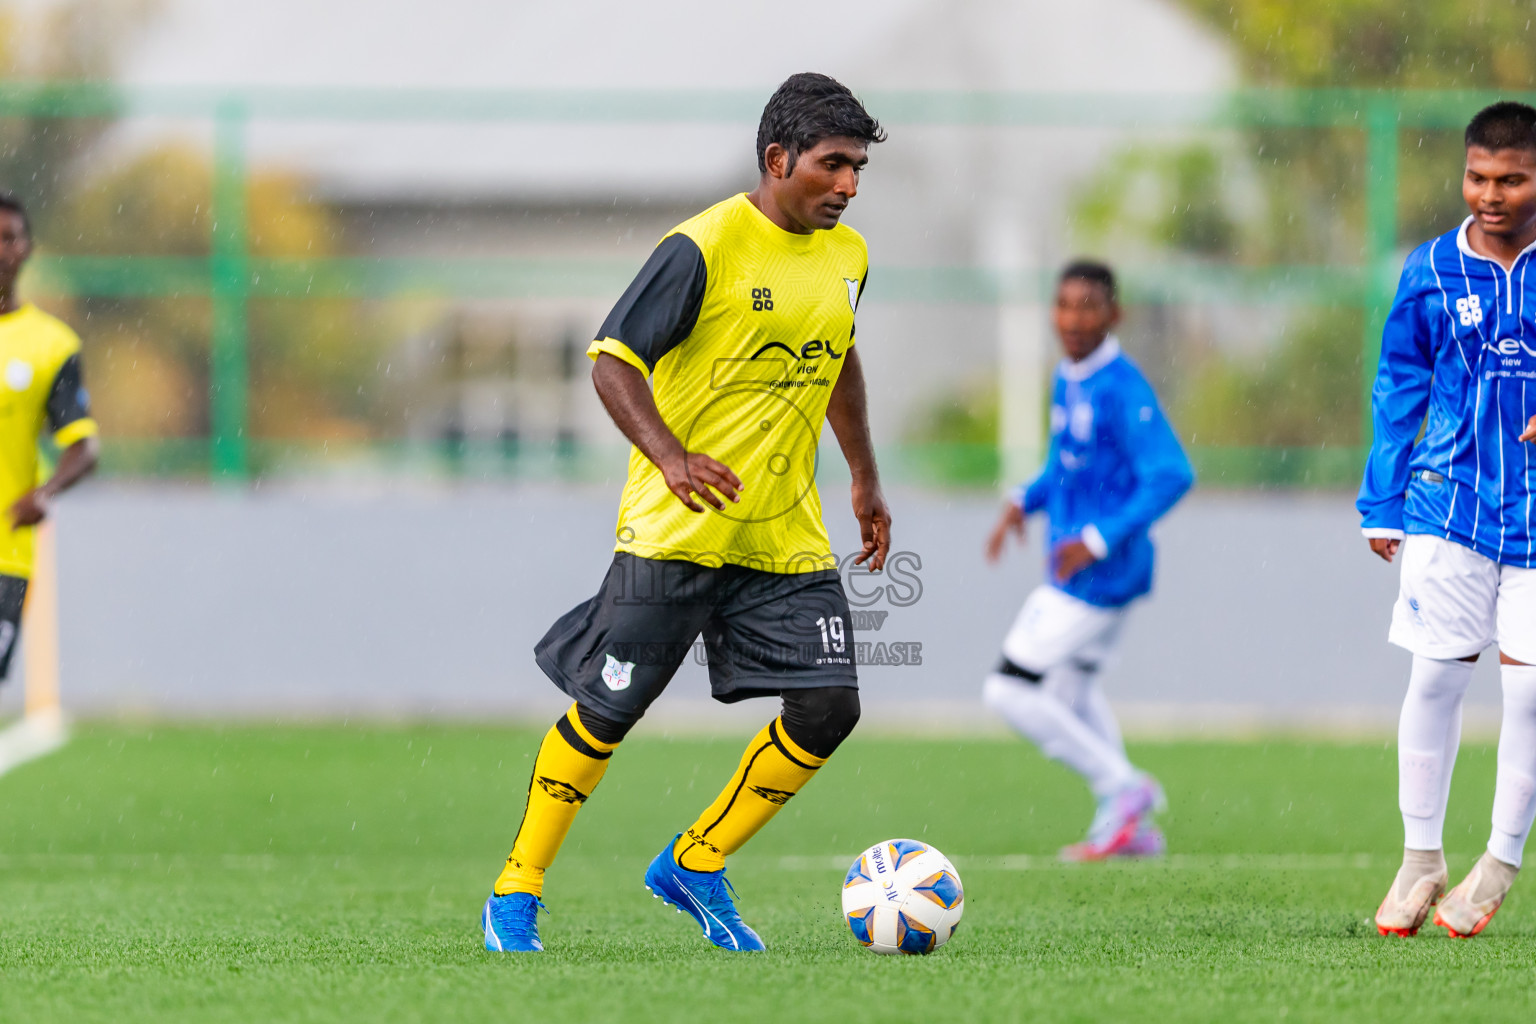 Chester Academy vs Kanmathi Juniorsfrom Manadhoo Council Cup 2024 in N Manadhoo Maldives on Friday, 16th February 2023. Photos: Nausham Waheed / images.mv